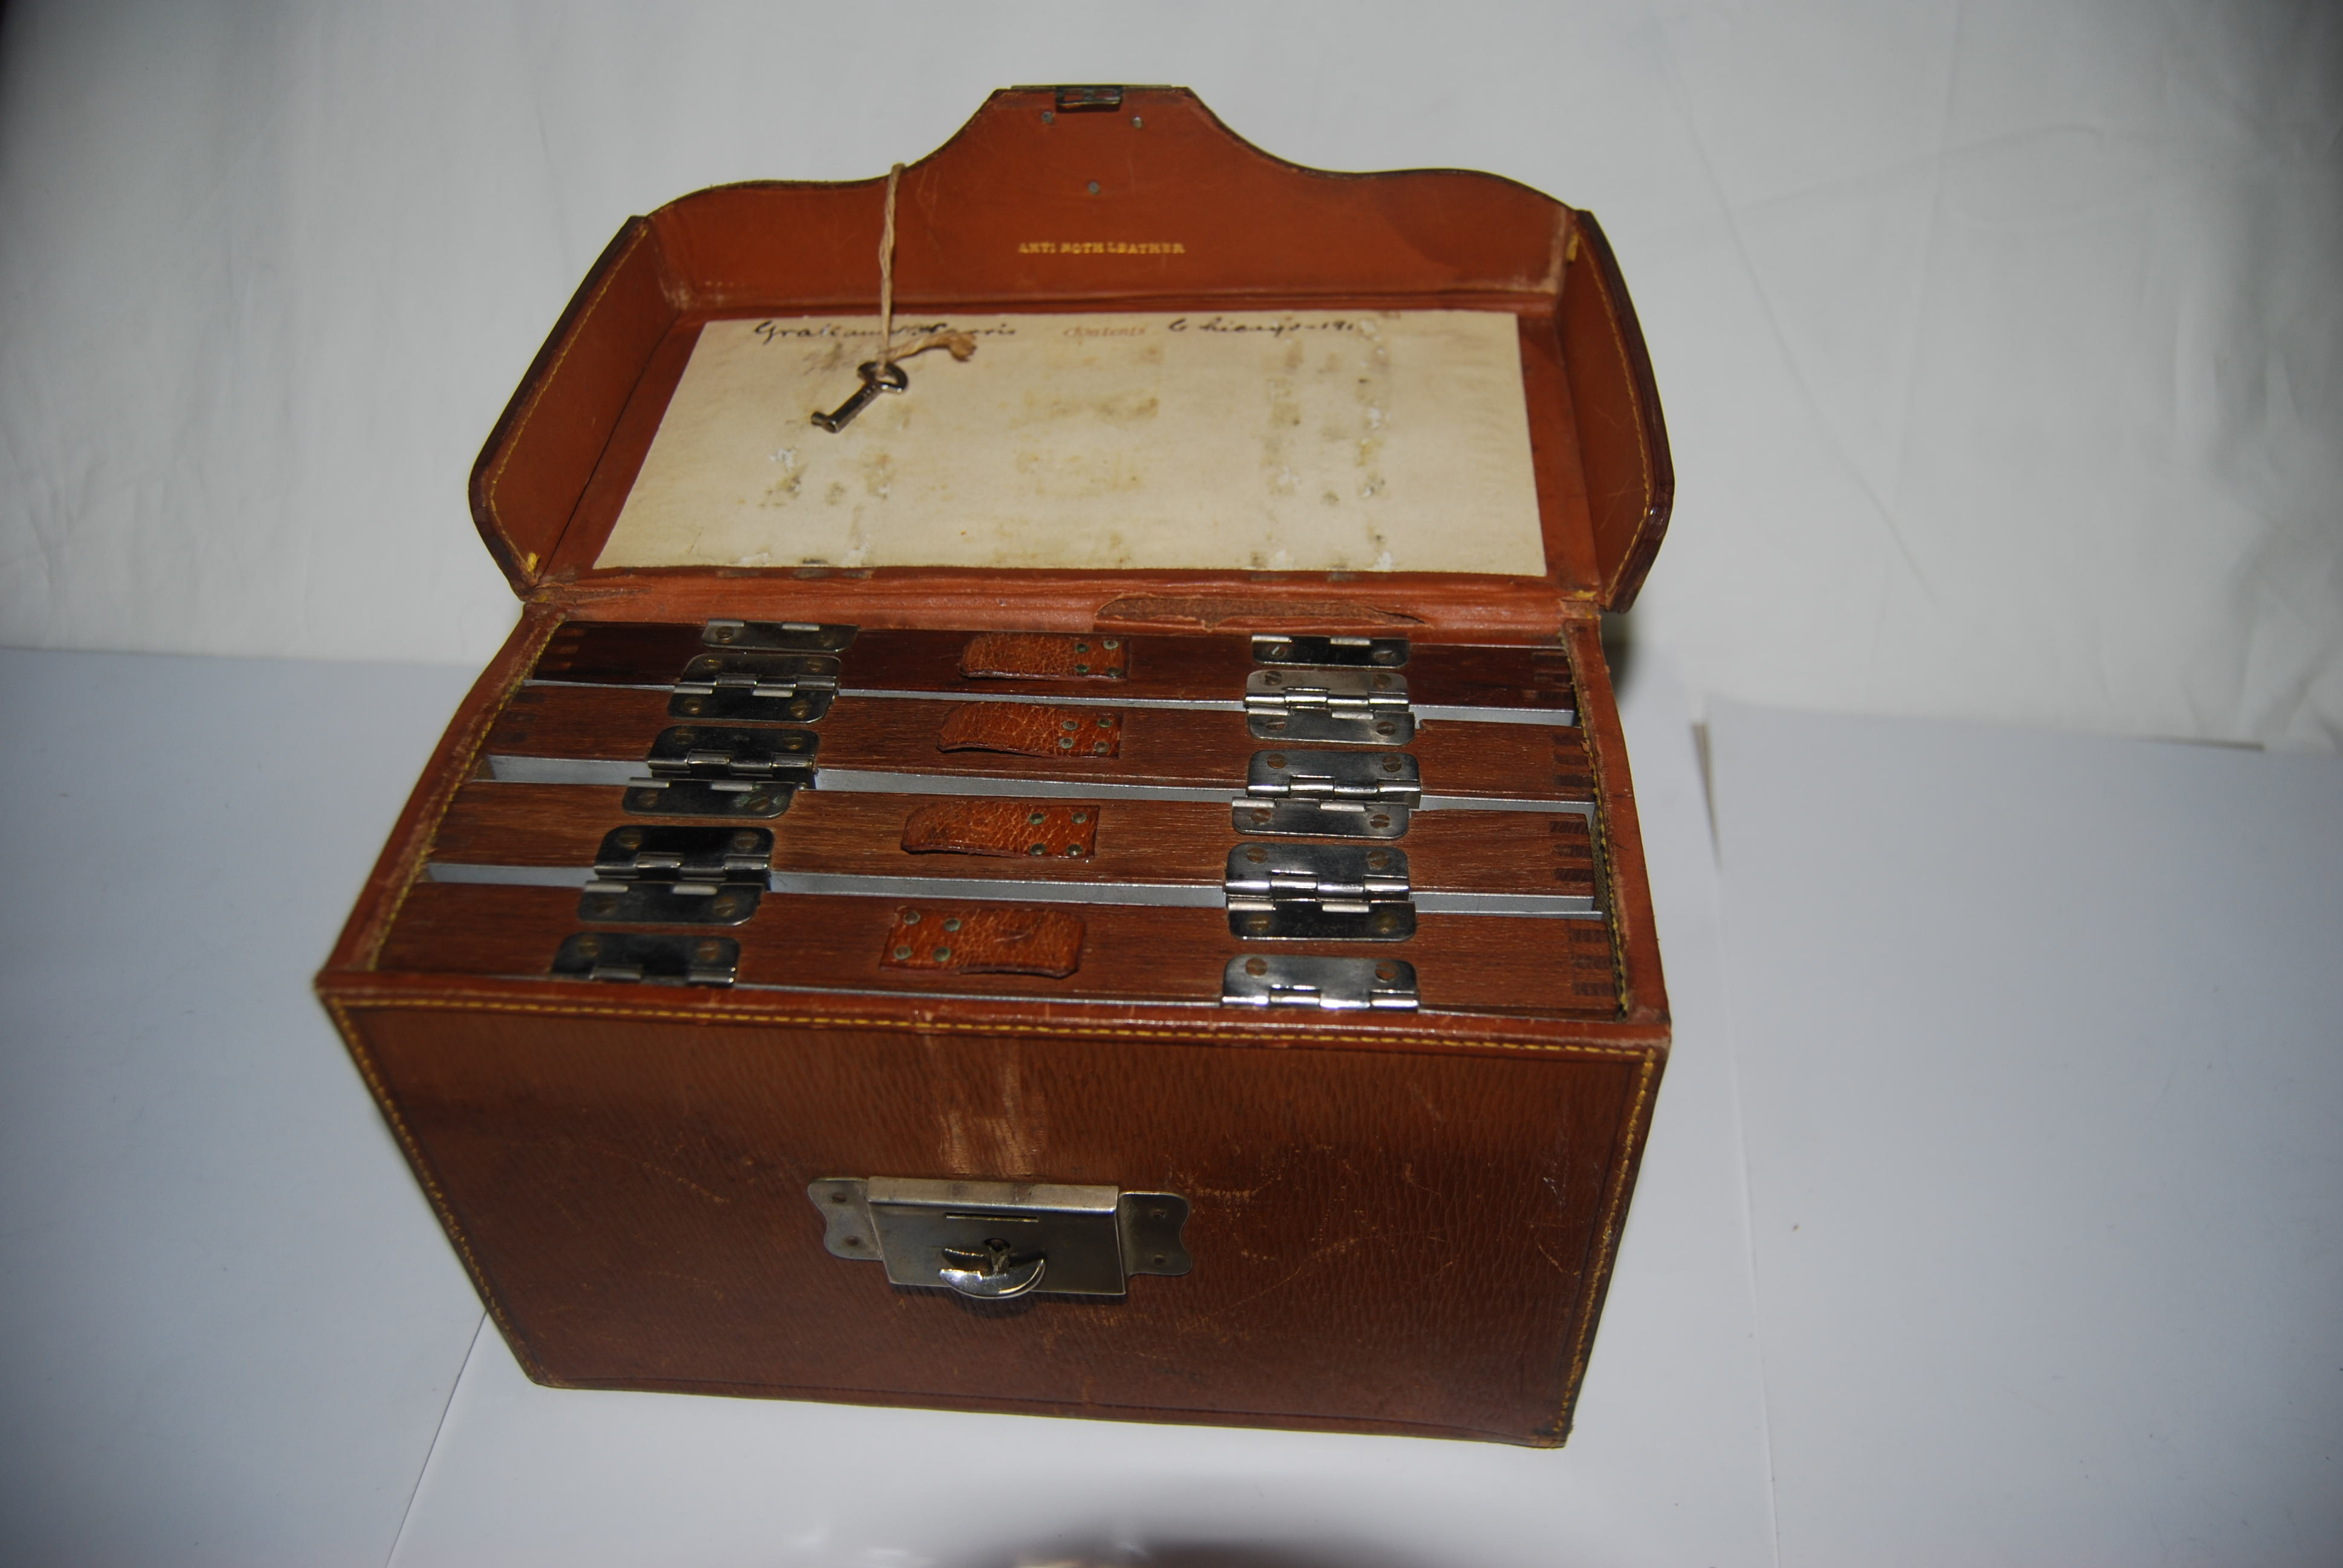 EARLY SALMON FLY STOCK CASE WITH FOUR WALLET INSERTS Holding 320 GUT-EYED  FULL DRESSED SALMON FLIES on Salmon Fly Clips. 8 1/2 in. x 5 in. x 4 1/4  in. Circa 1911-1918. SOLD